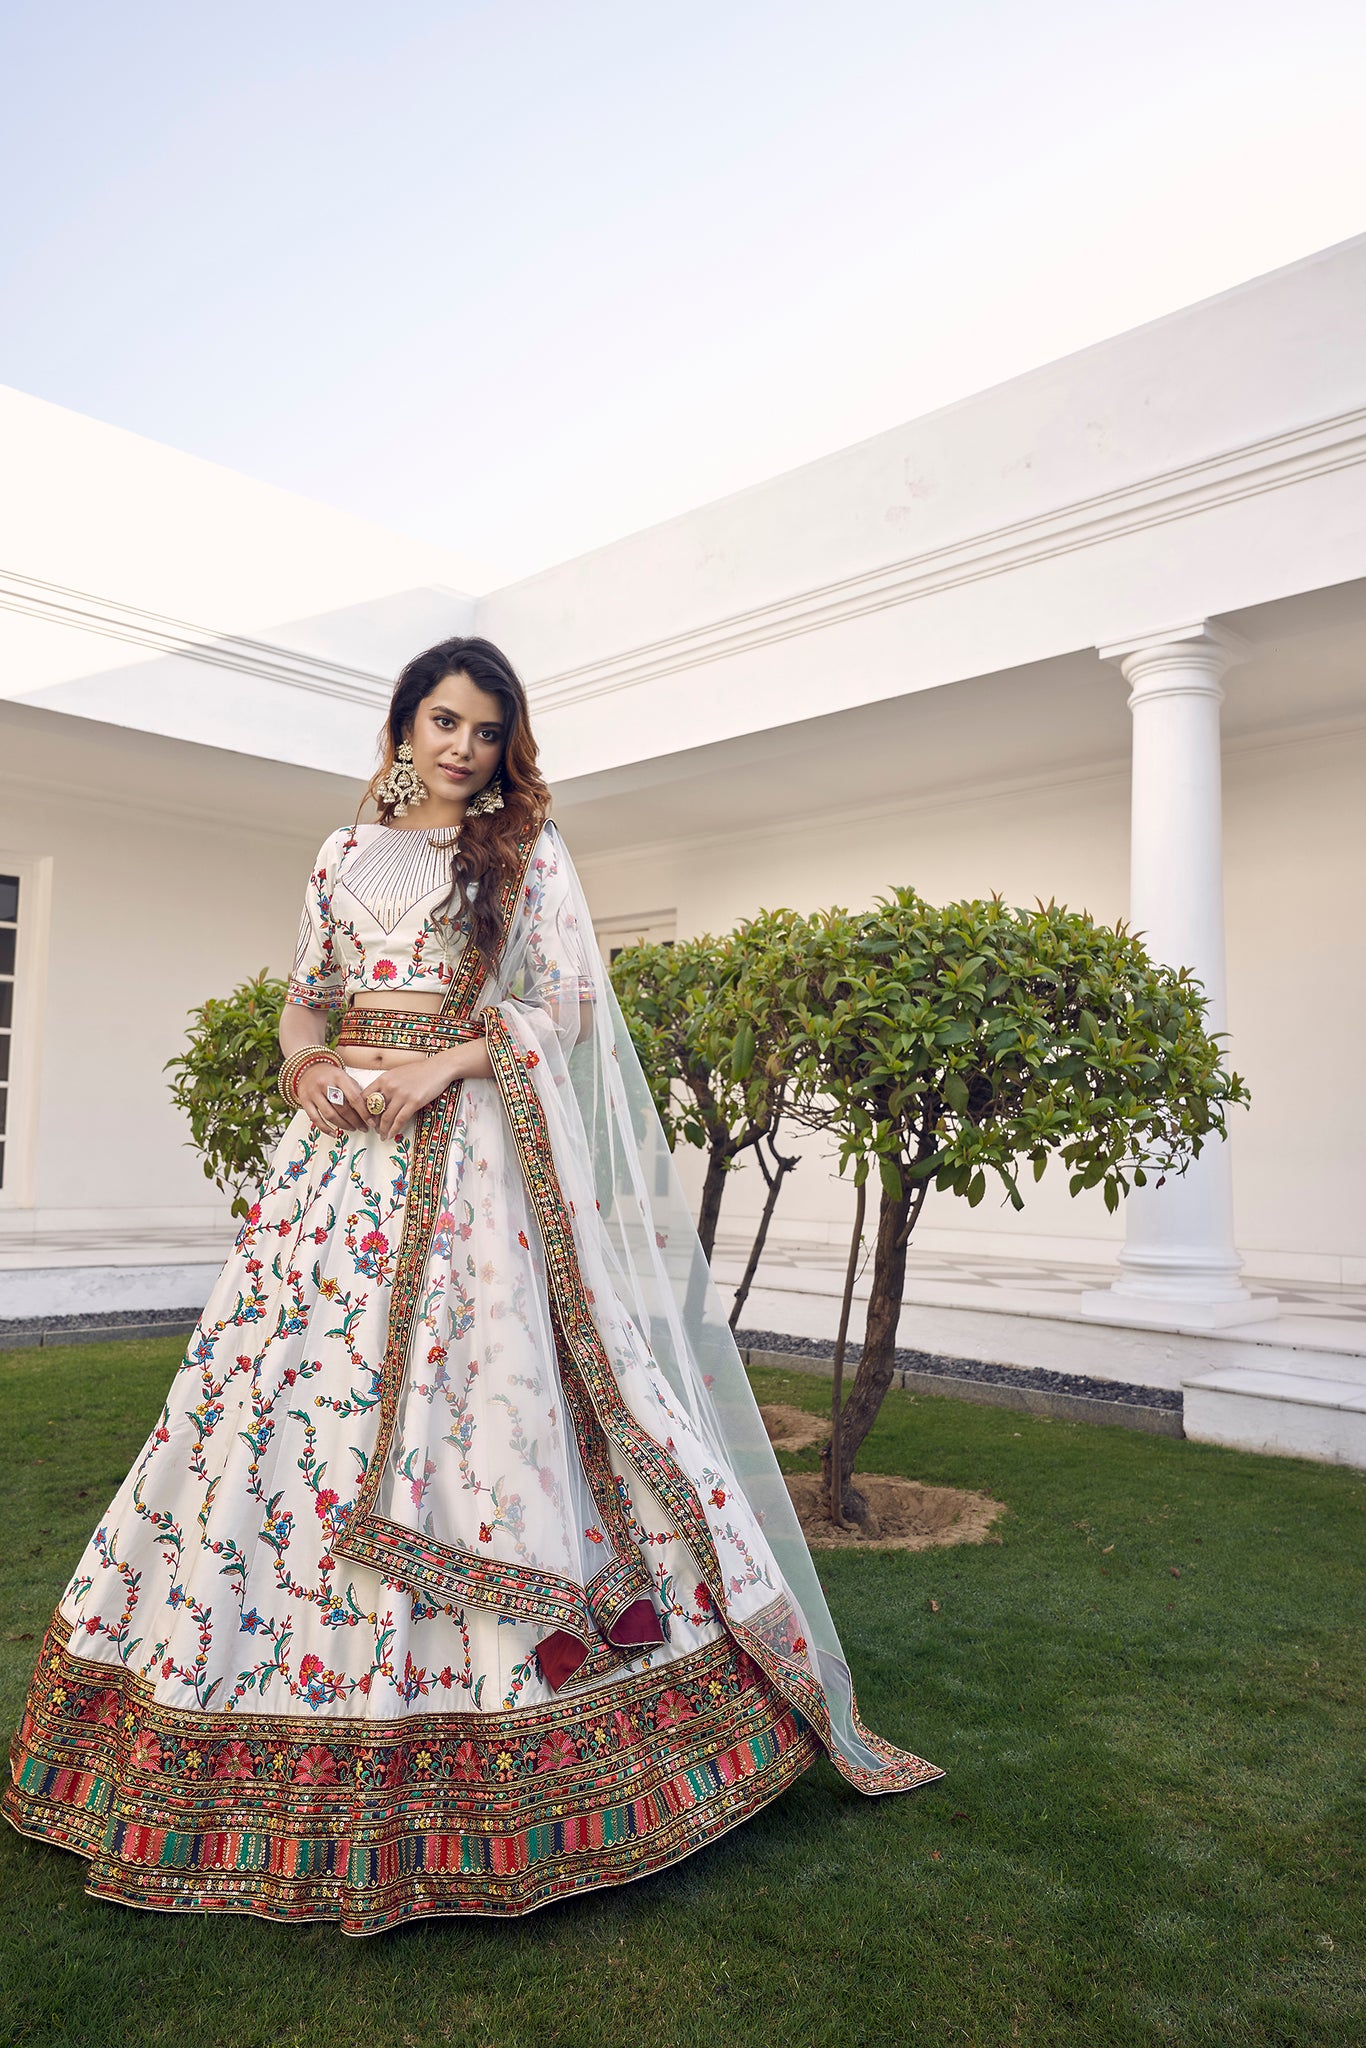 Pothys - A grand bridal lehenga choli http://bit.ly/1T3zH47 in pink with  heavy embroidery for the summer bride's reception to keep her looking cool  and beautiful. Bridal lehengas like never before at Pothys